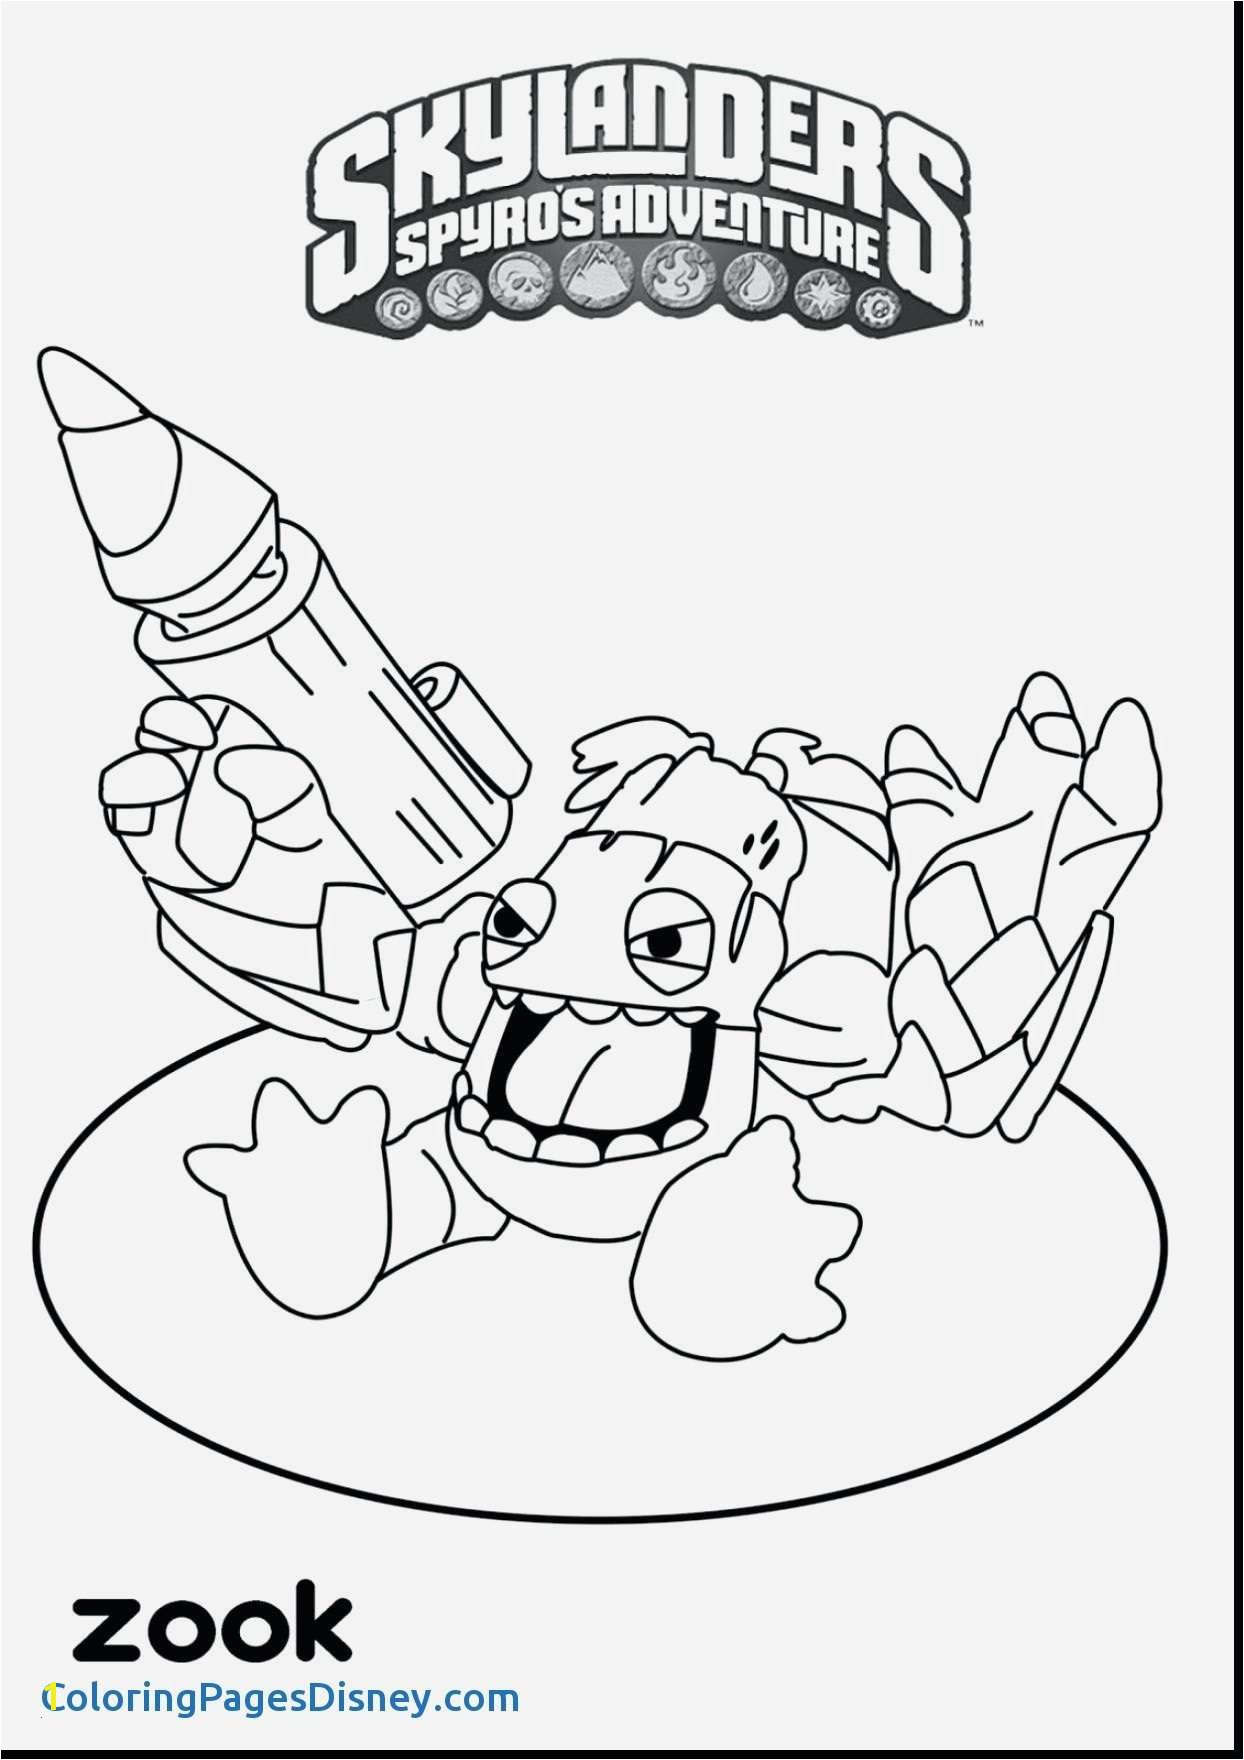 Cartoon Pineapple Coloring Page Coloring Pages for Boys Lego Printable Lego Marvel Coloring Pages